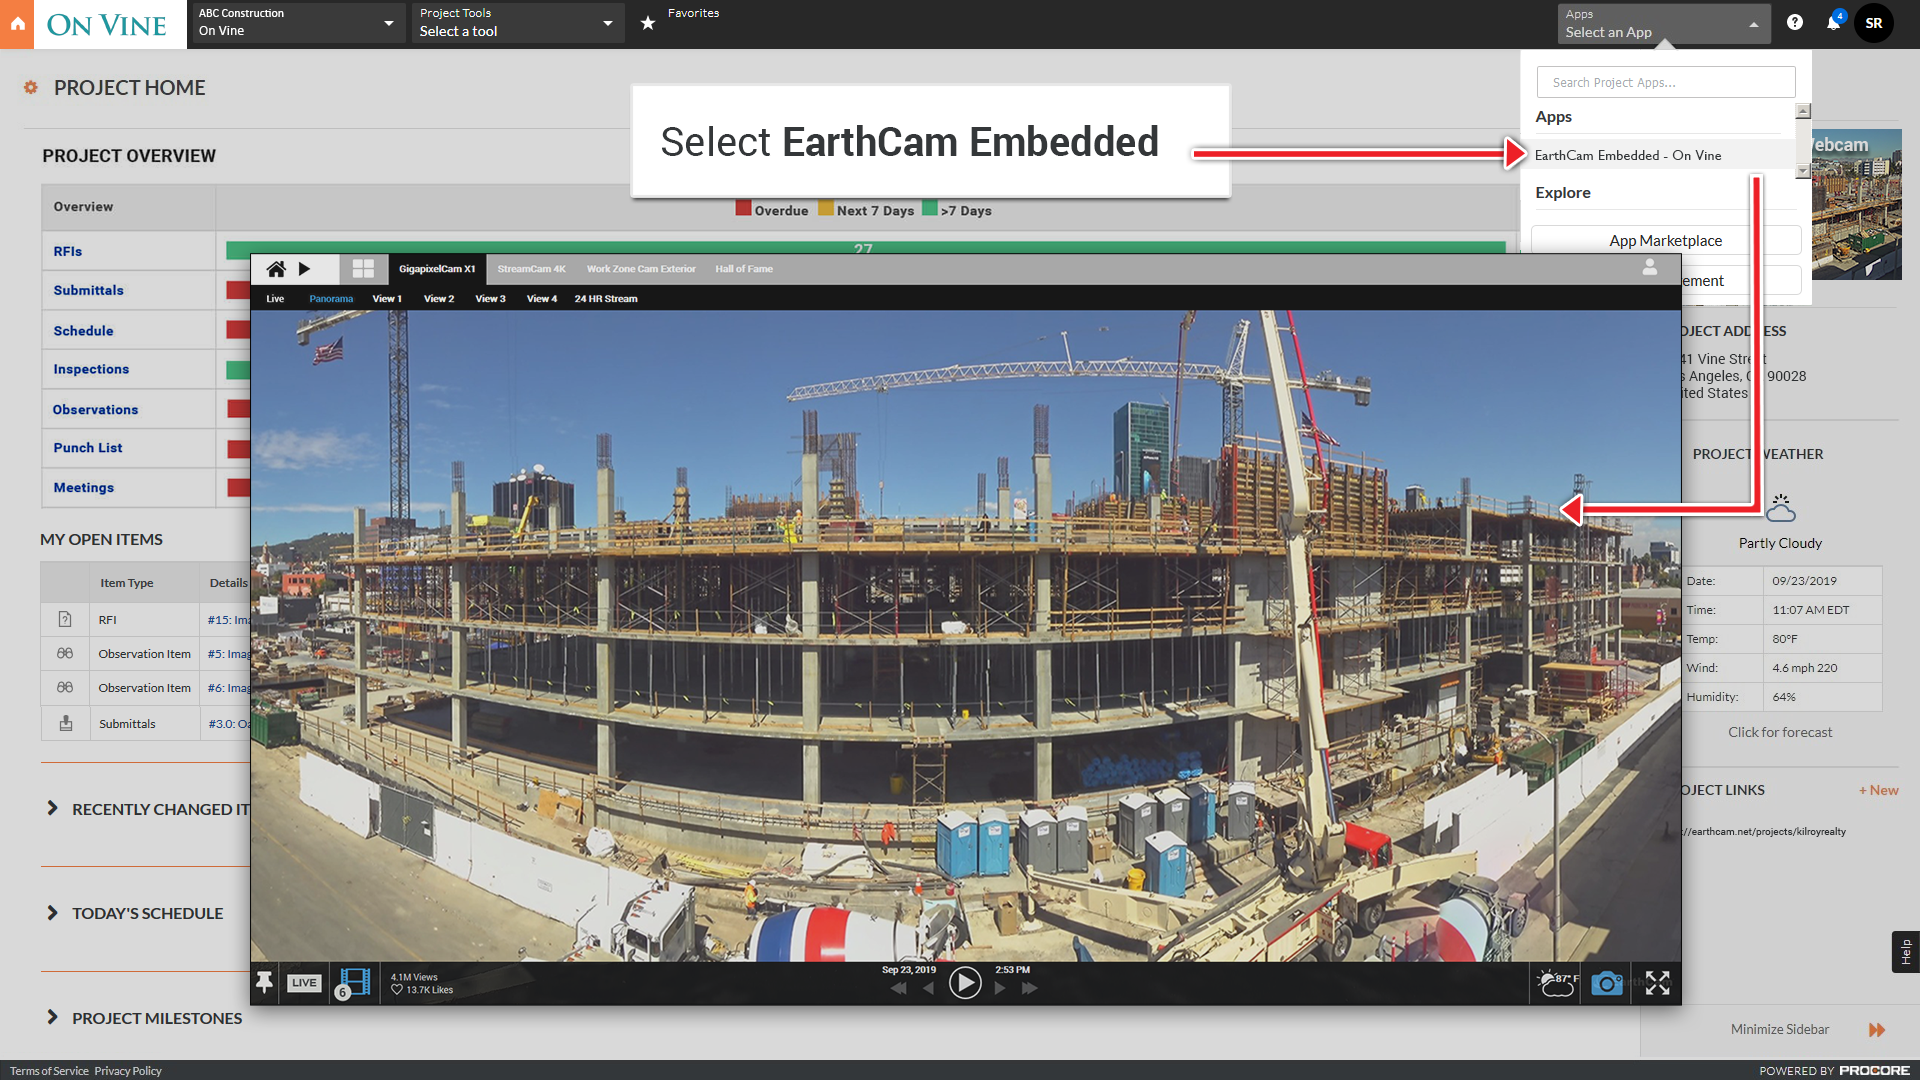 The new EarthCam-infused Procore experience makes it easy for users to add the app to any of their projects, extending the capabilities for sharing jobsite content, all within Procore.